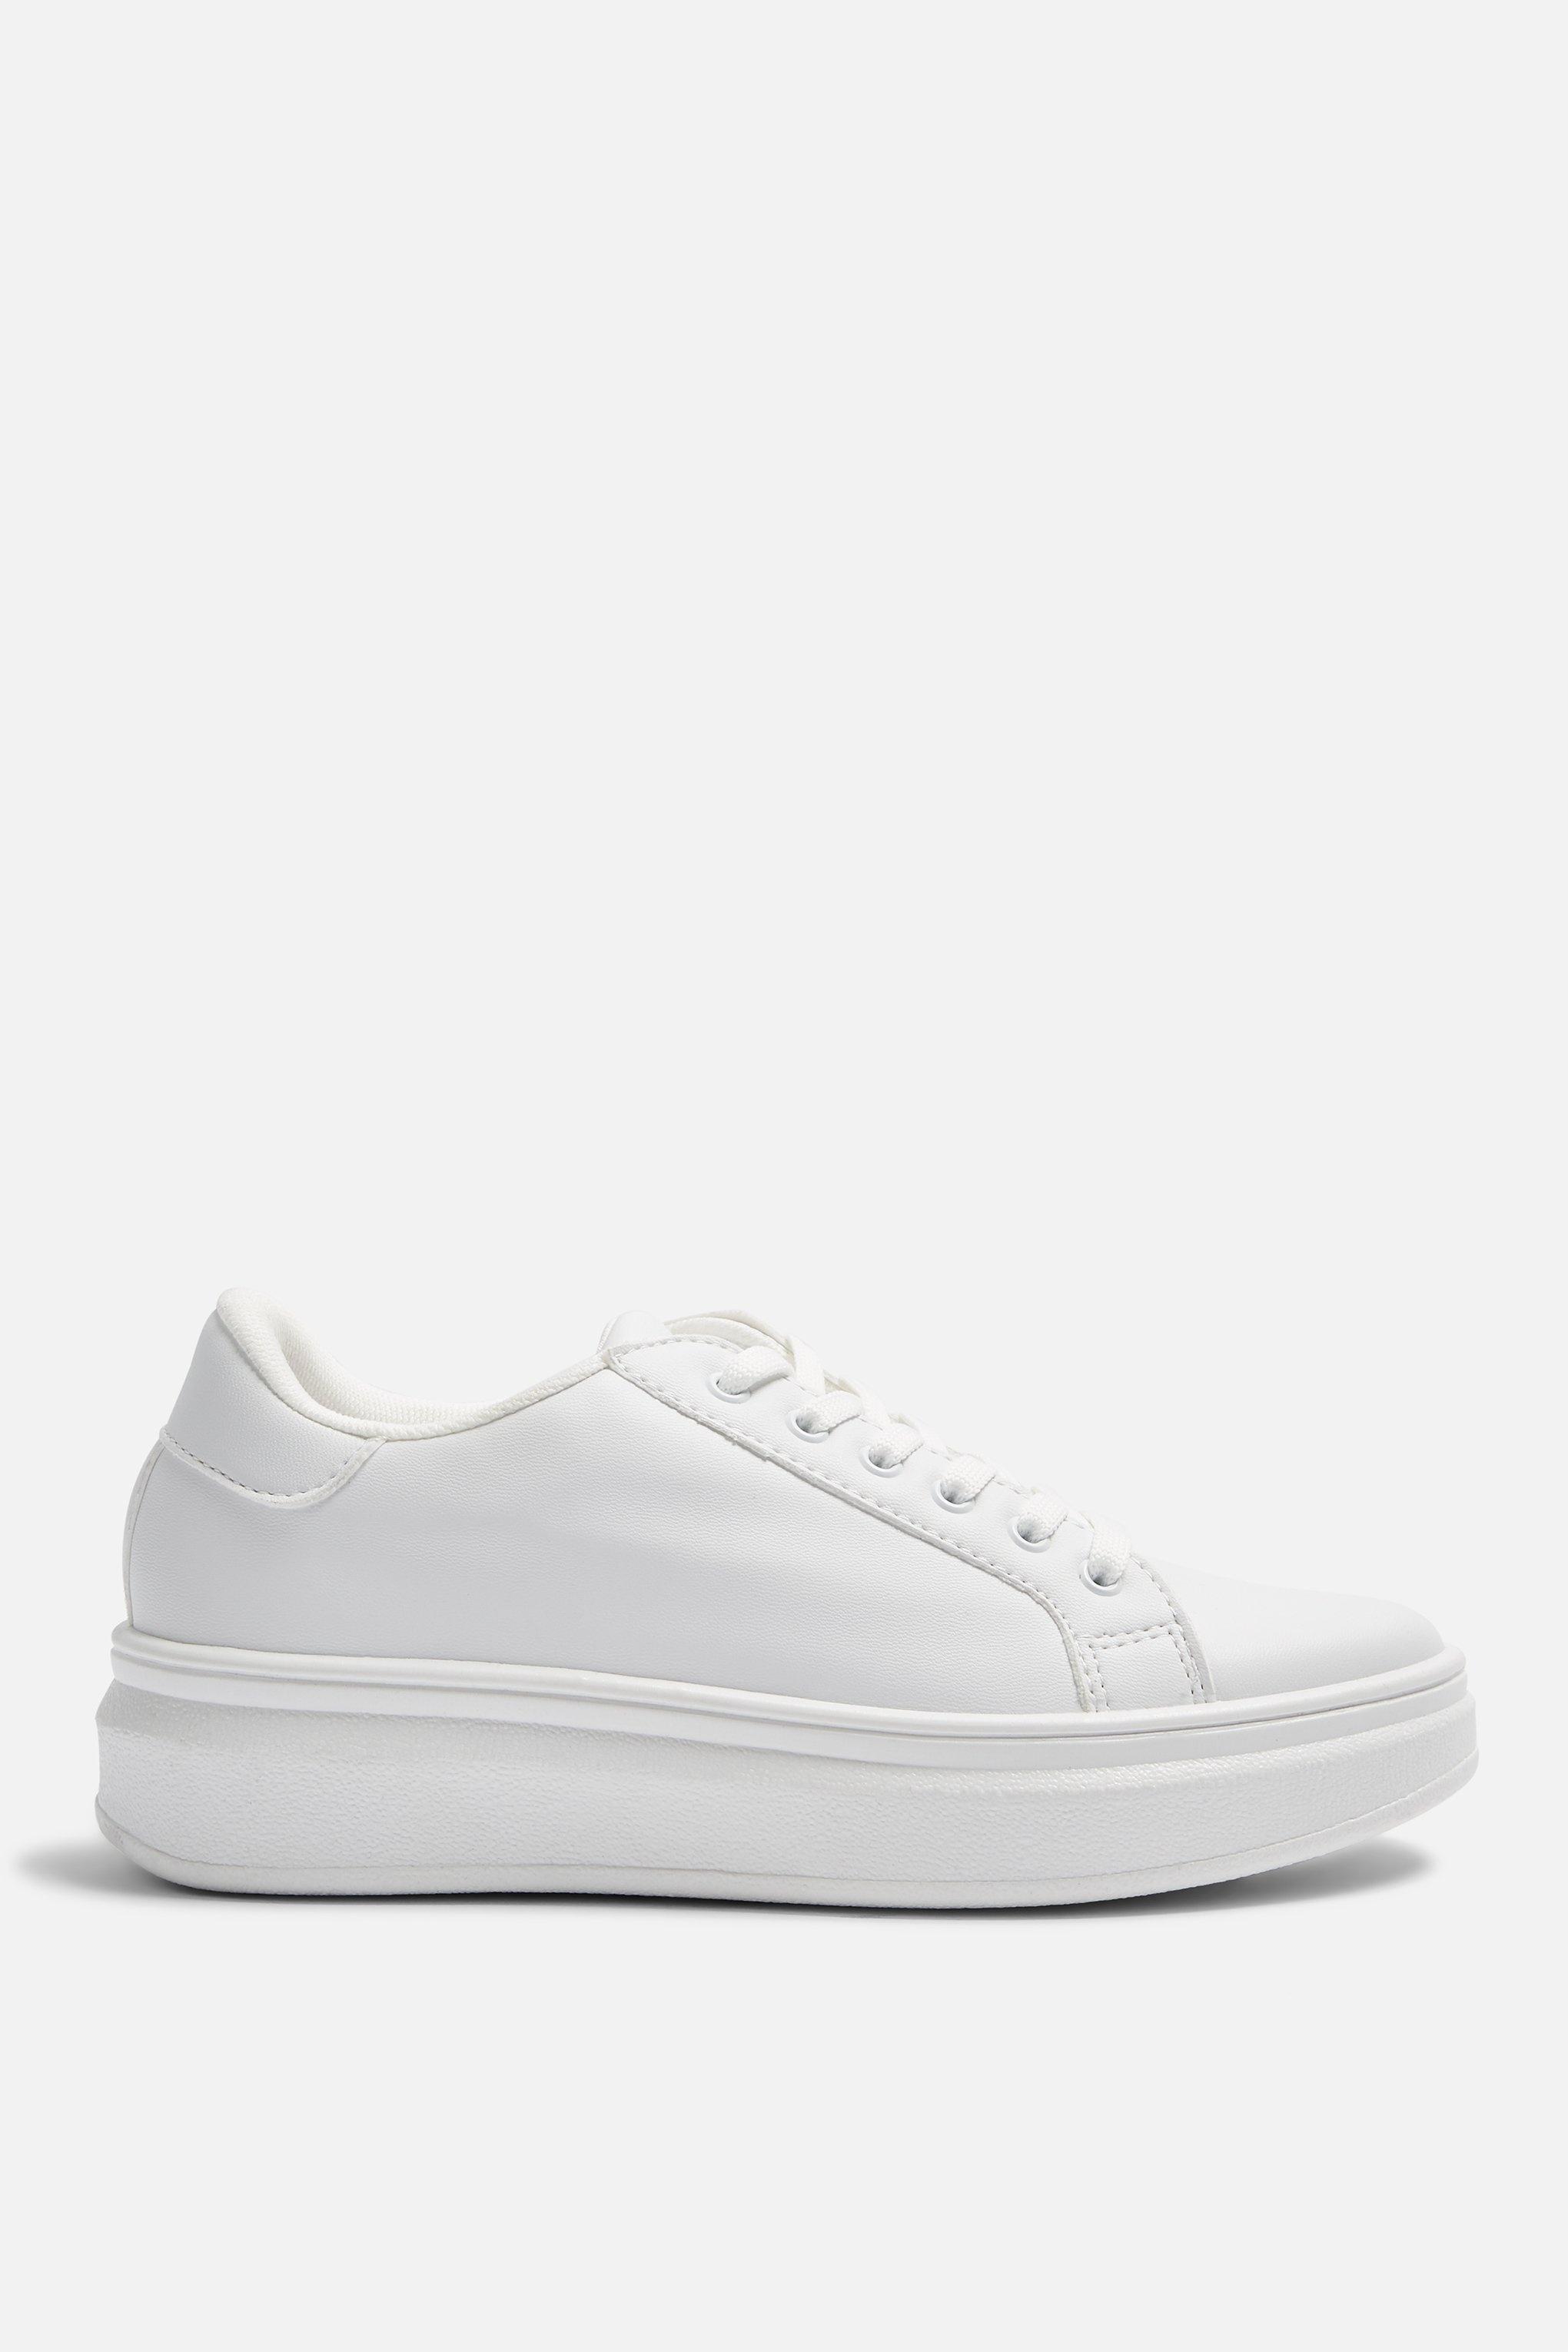 topshop white sneakers